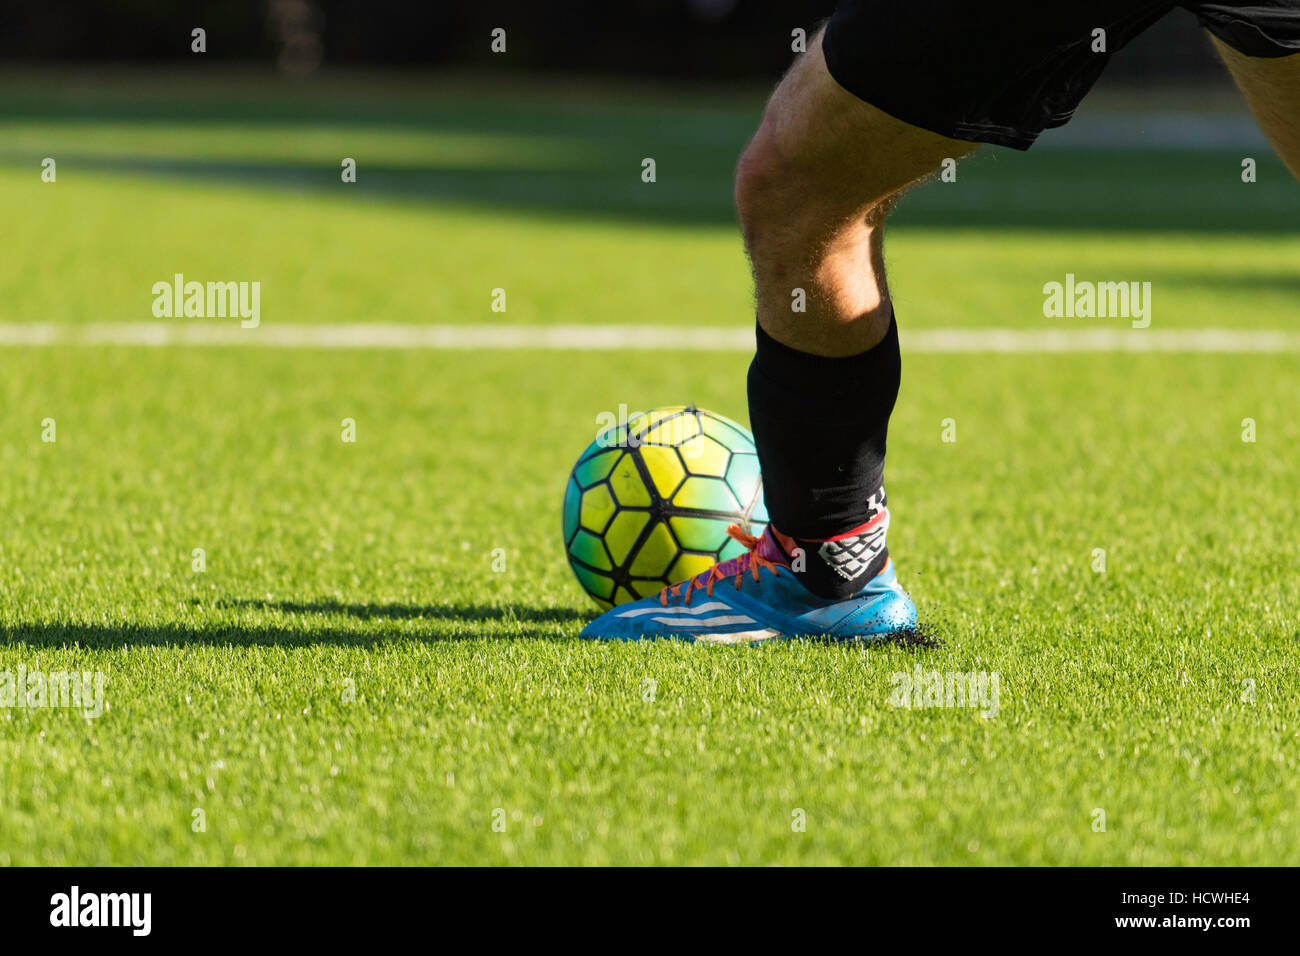 A youth lines up to kick a soccer ball on an astro turf soccer field Stock Photo